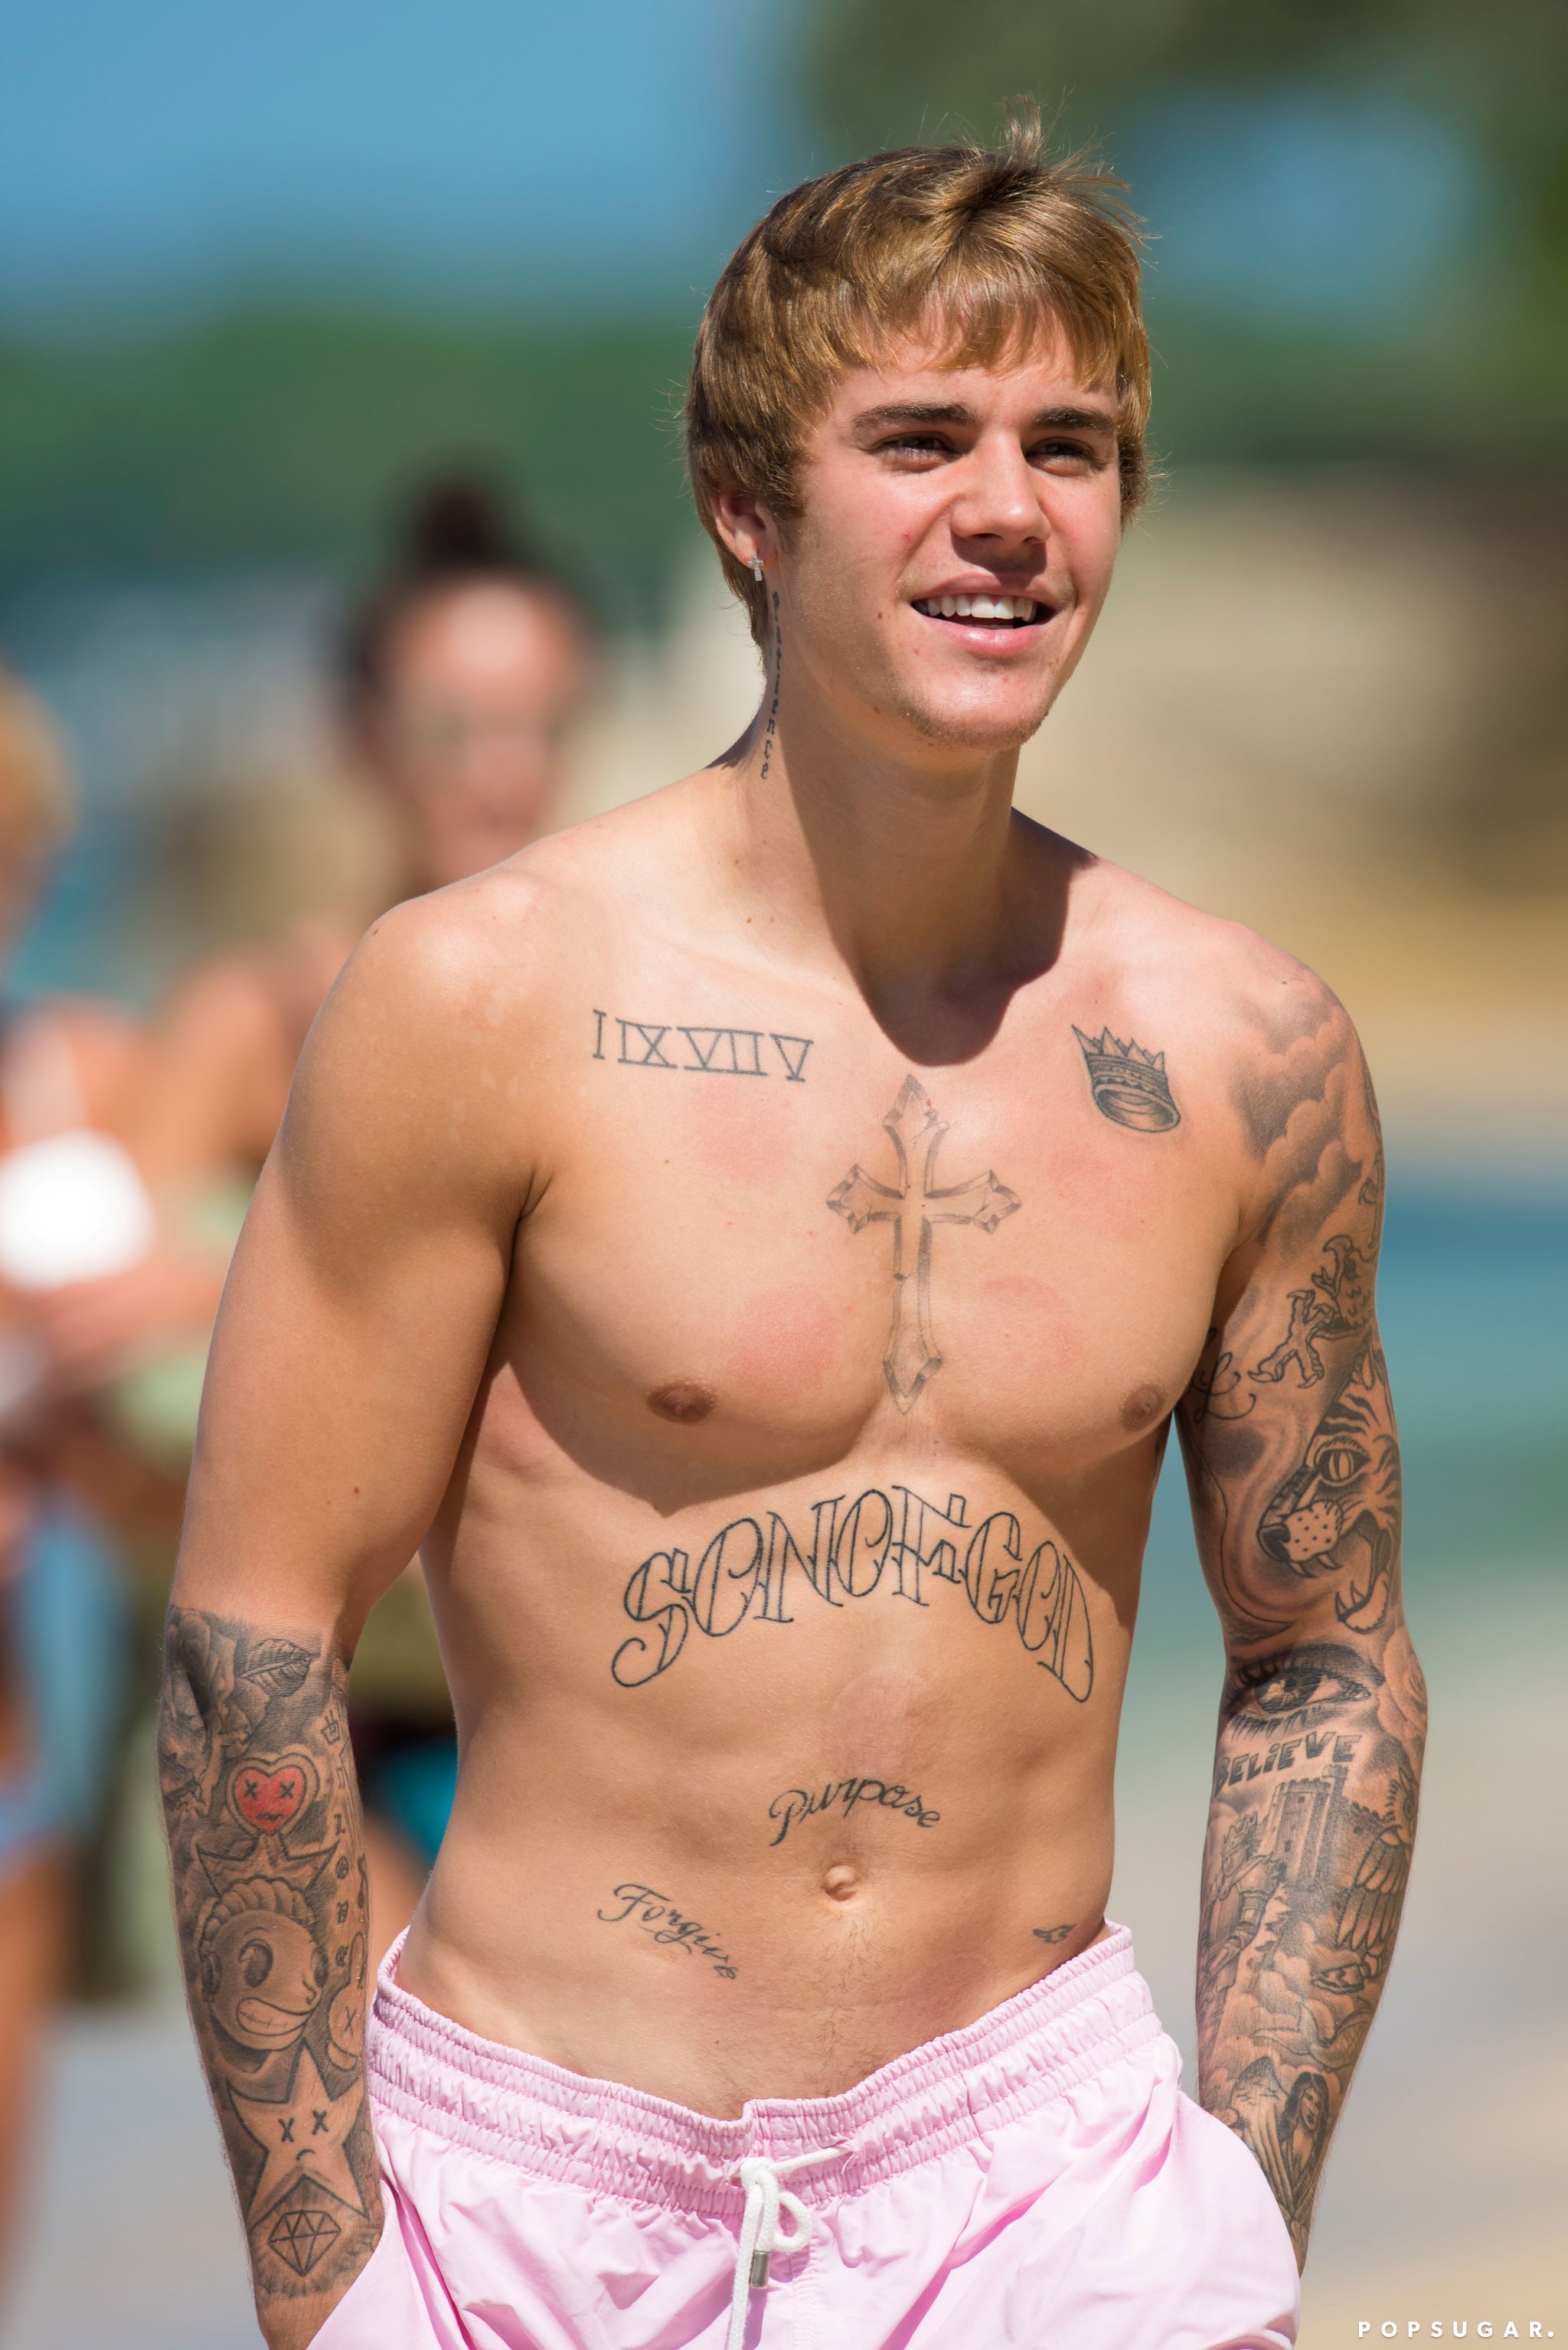 When Justin Bieber Poses For A Oh-So-Perfect Shirtless Selfie! 3